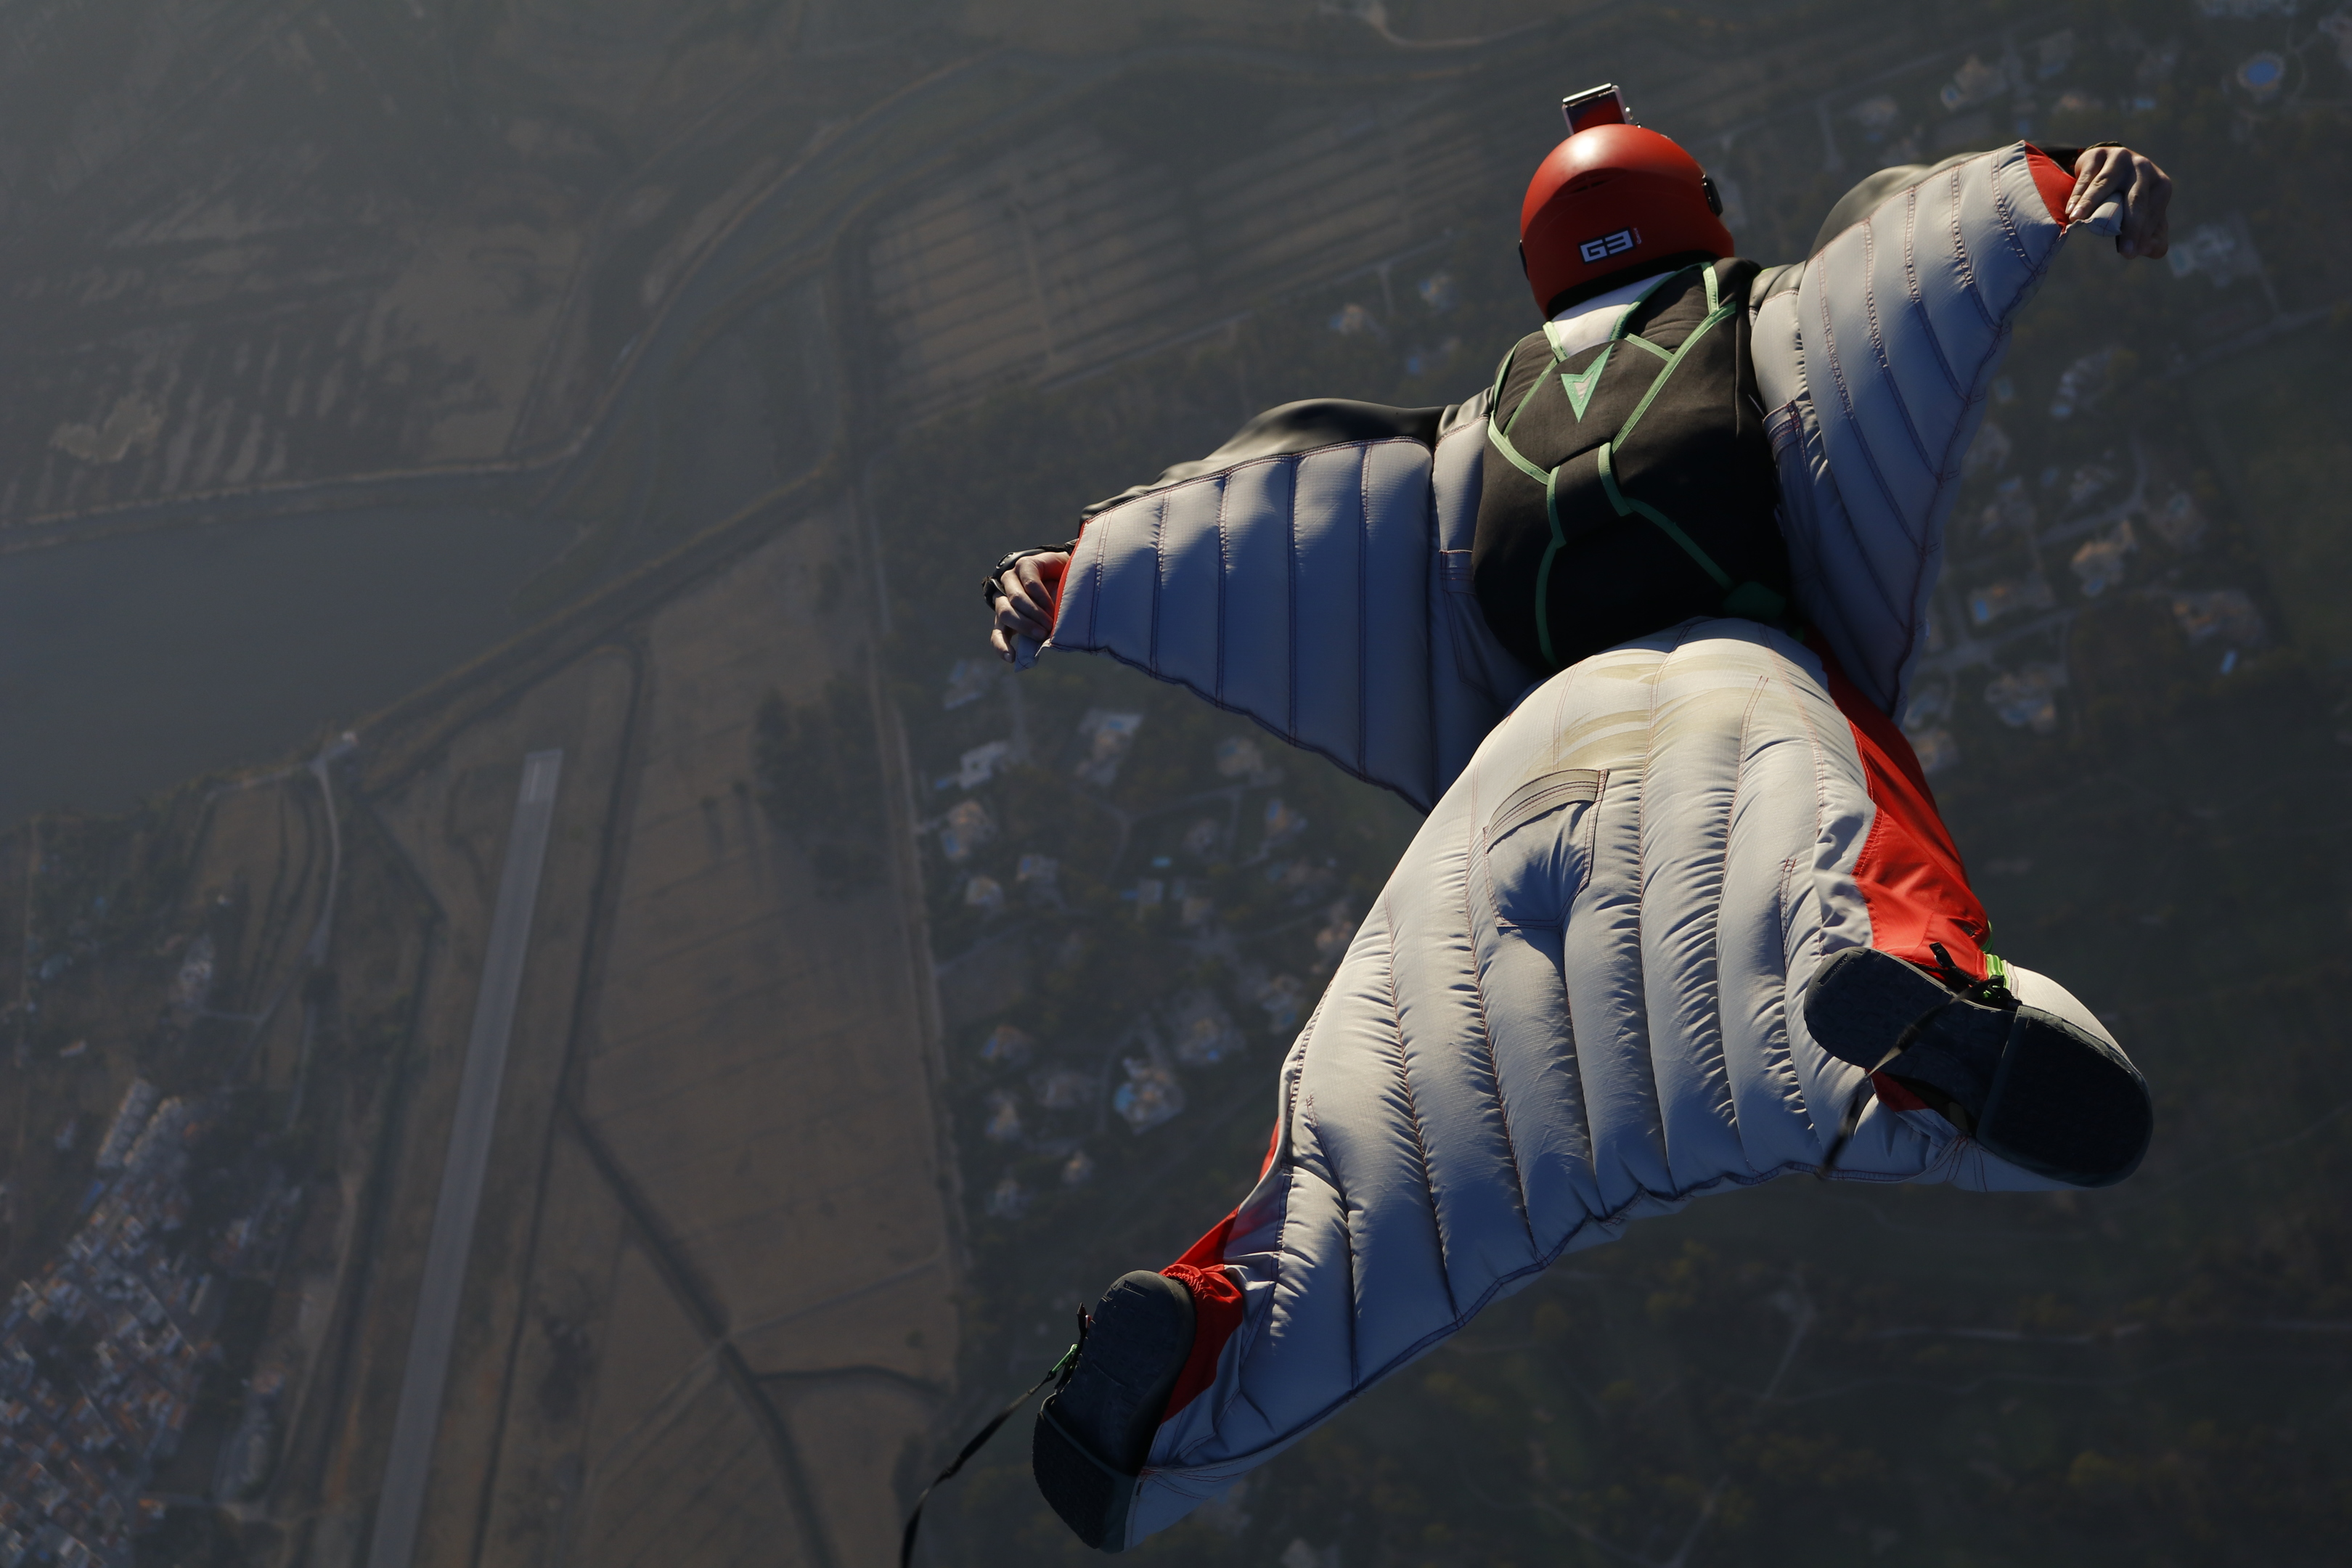 Liam Byrne could be the youngest wingsuit flyer to take to the skies.